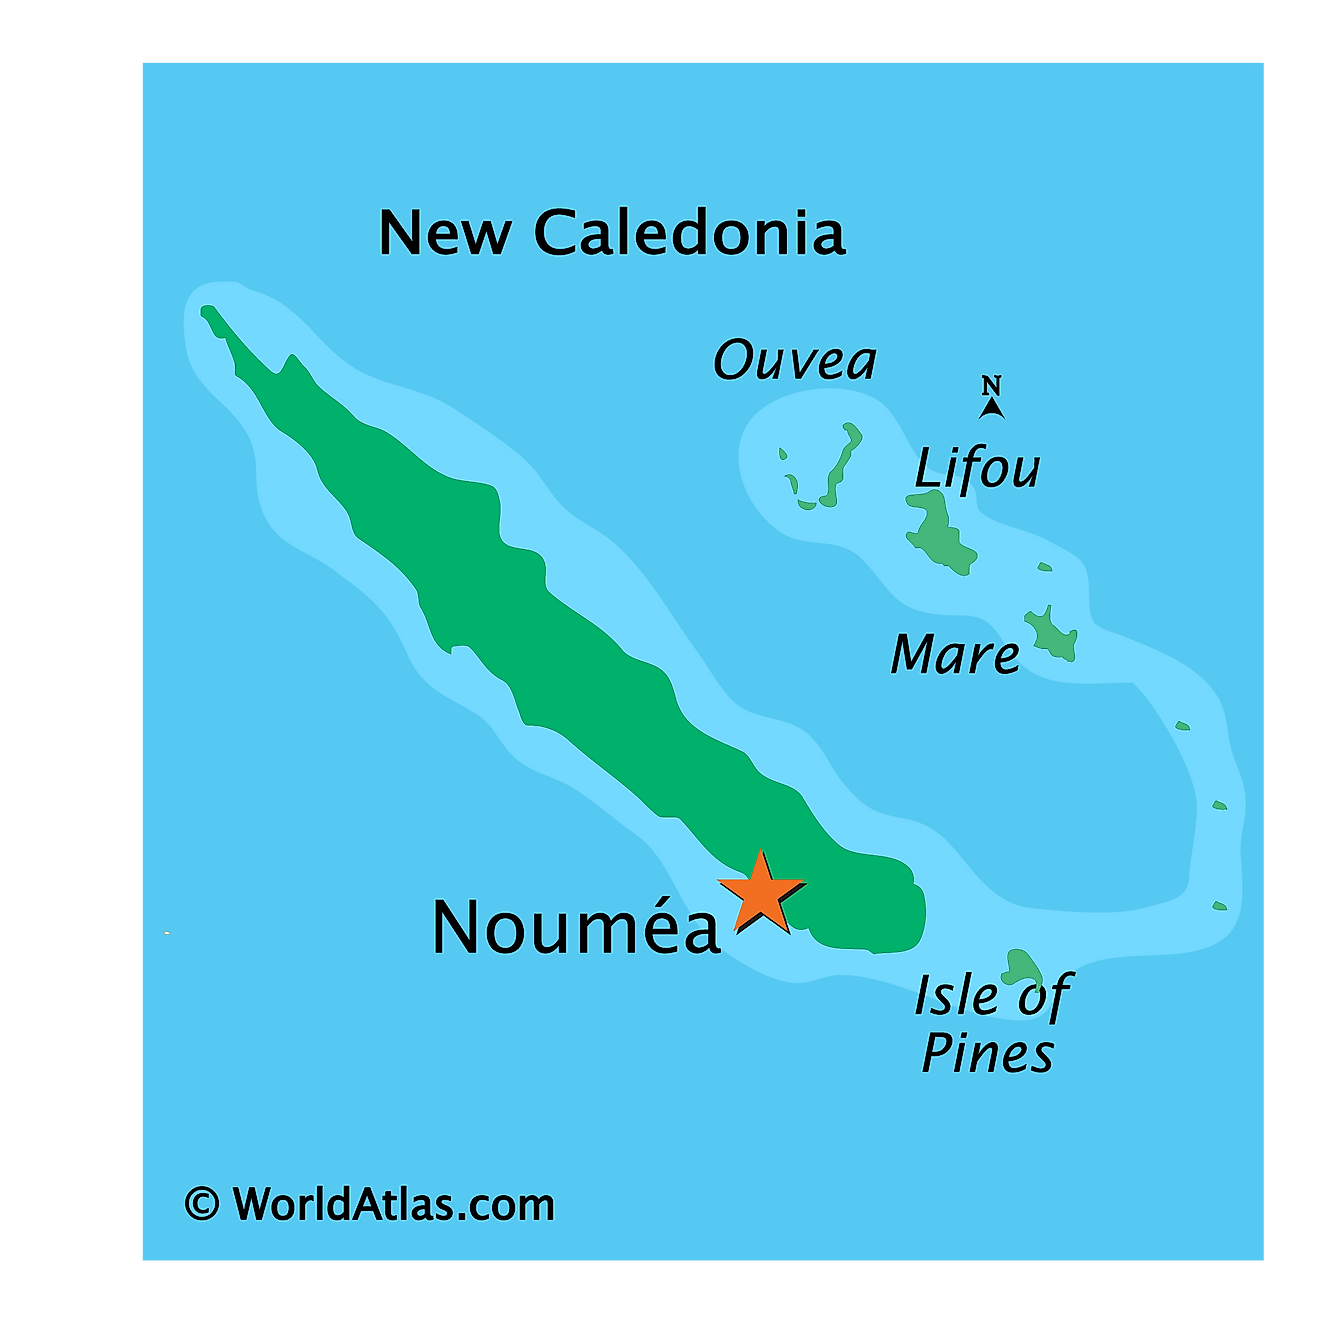 Physical Map of New Caledonia showing major islands.